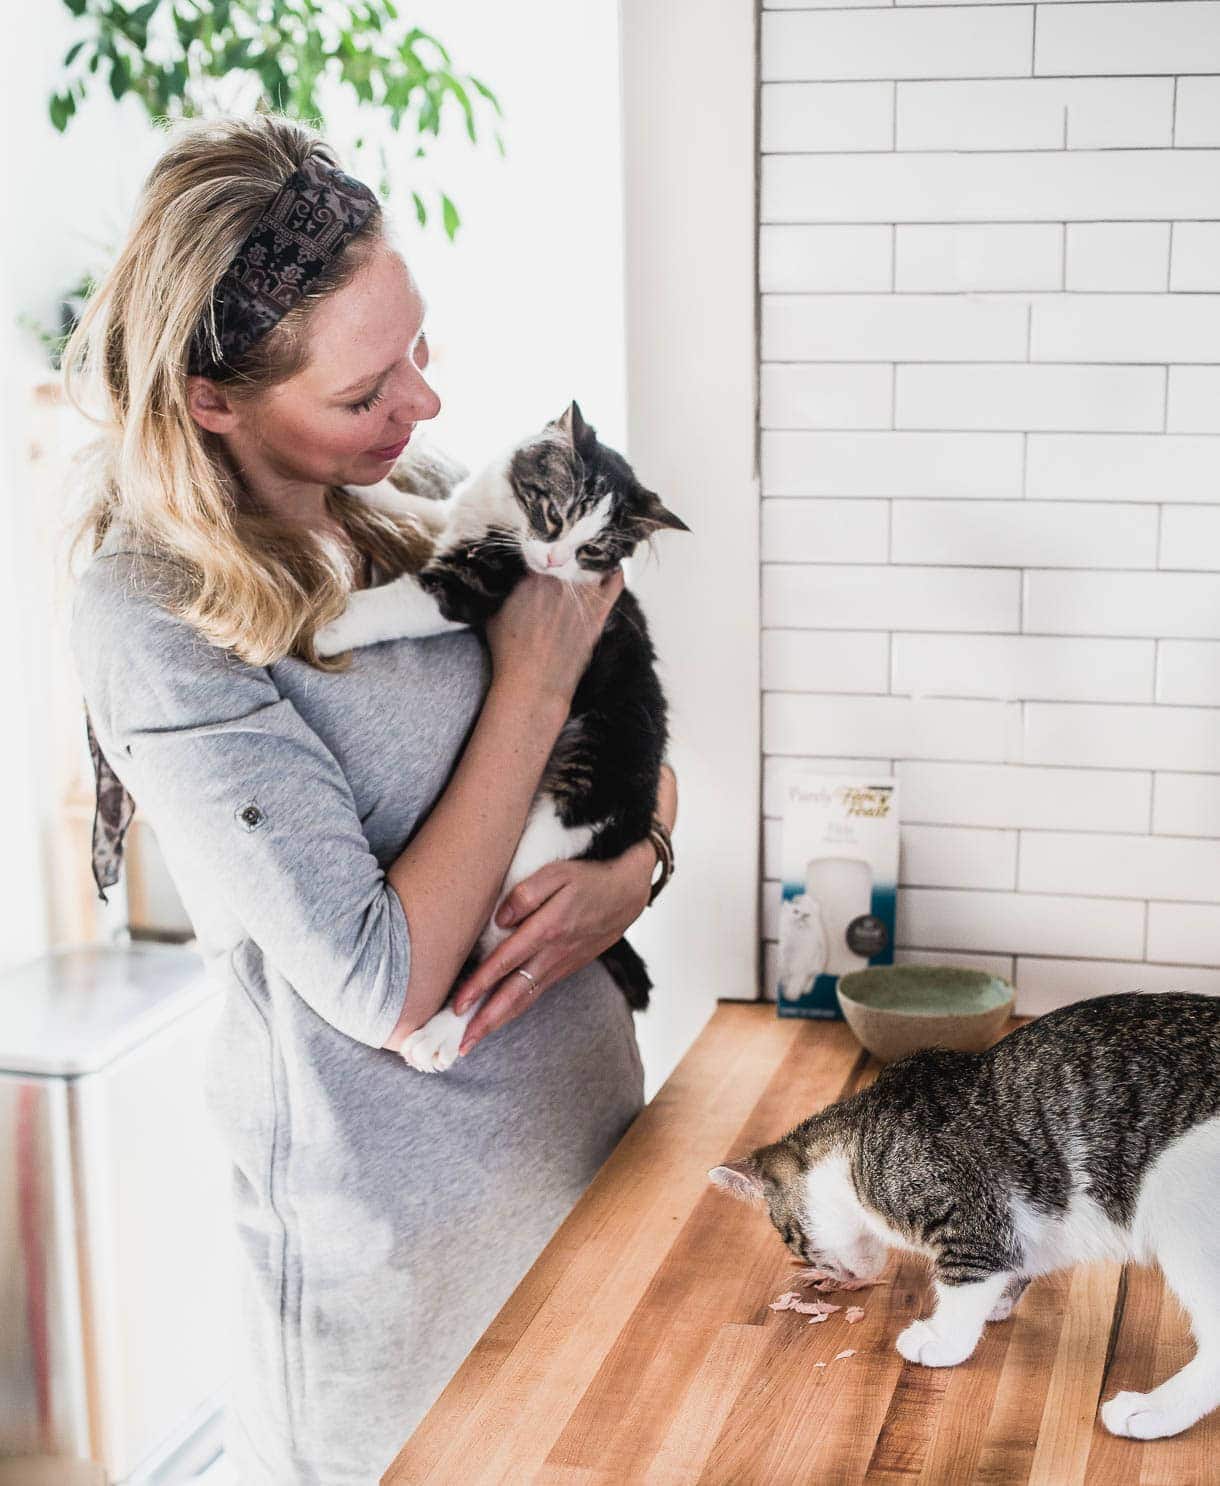 Introducing Resident Cats To New Cats: The Universal Language of Eating Together